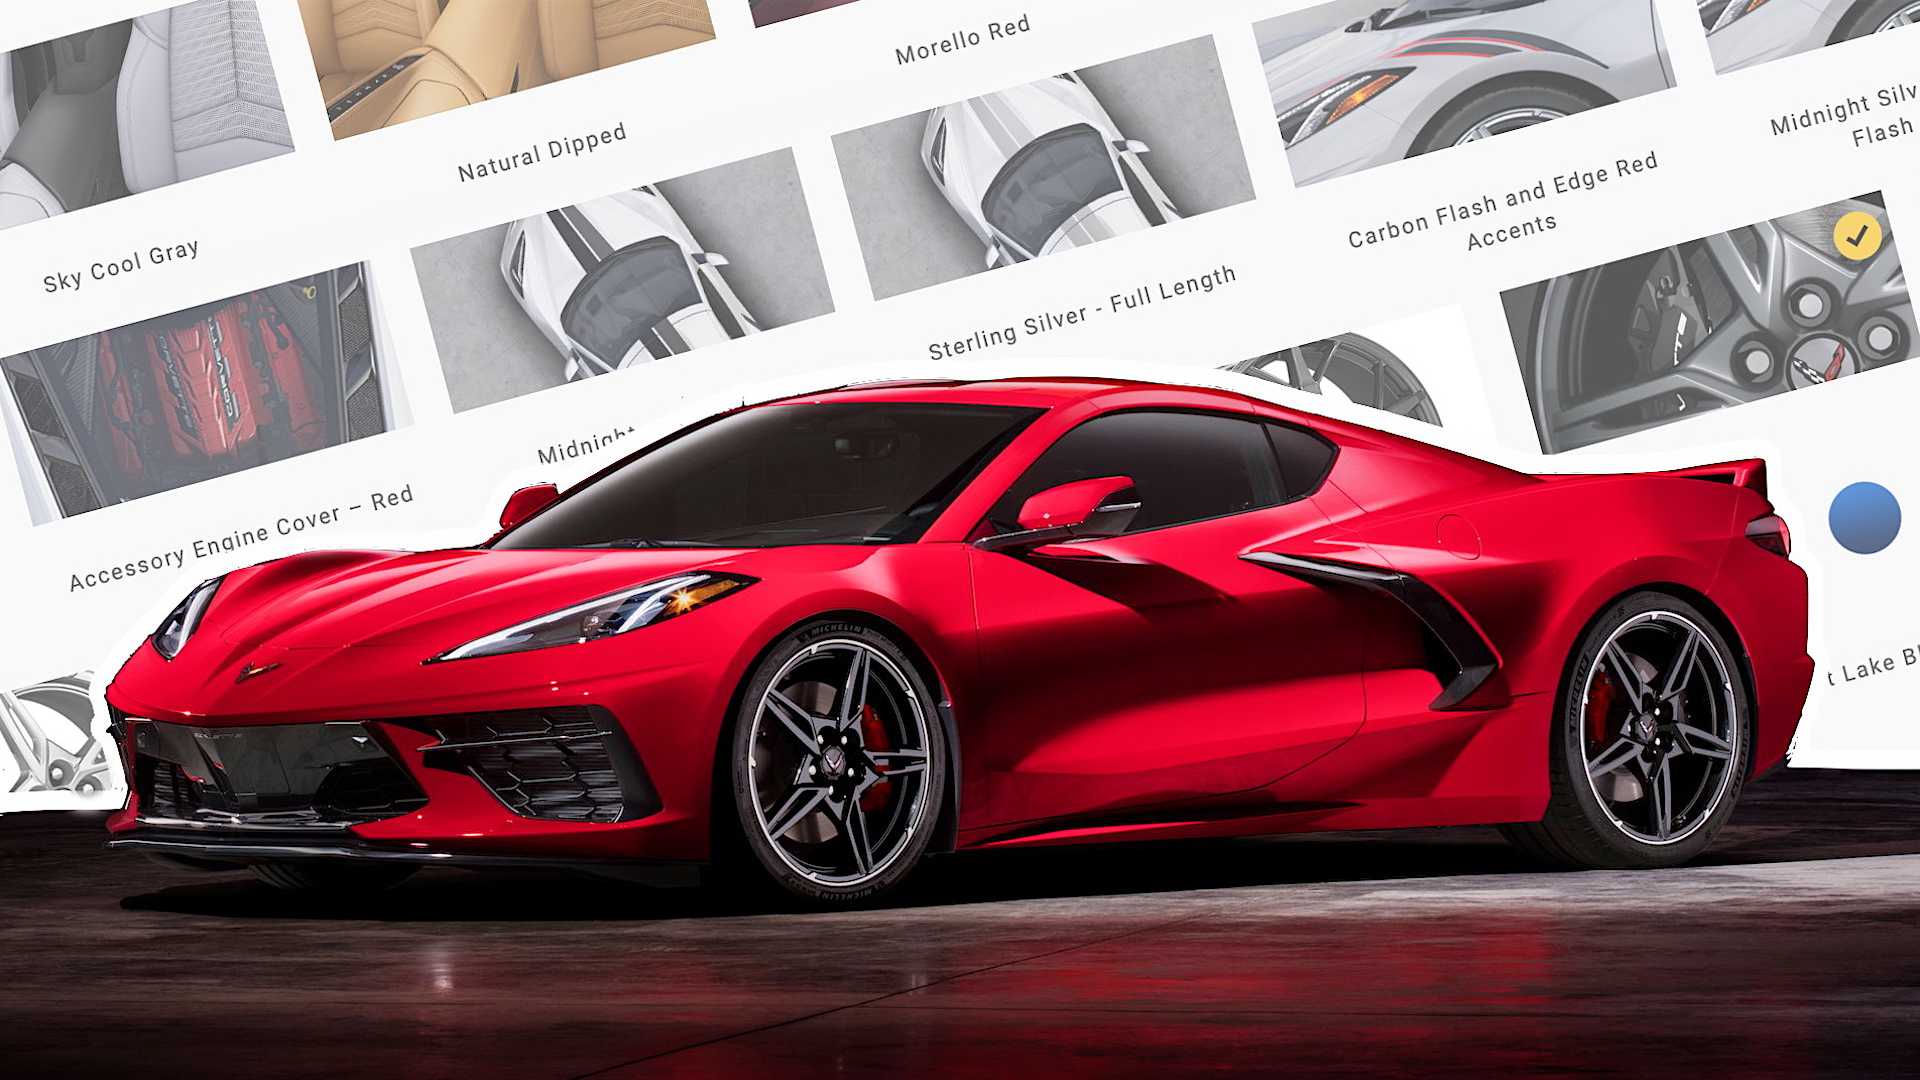 Chevy Corvette Stingray Nearly Sold Out For First Model Year